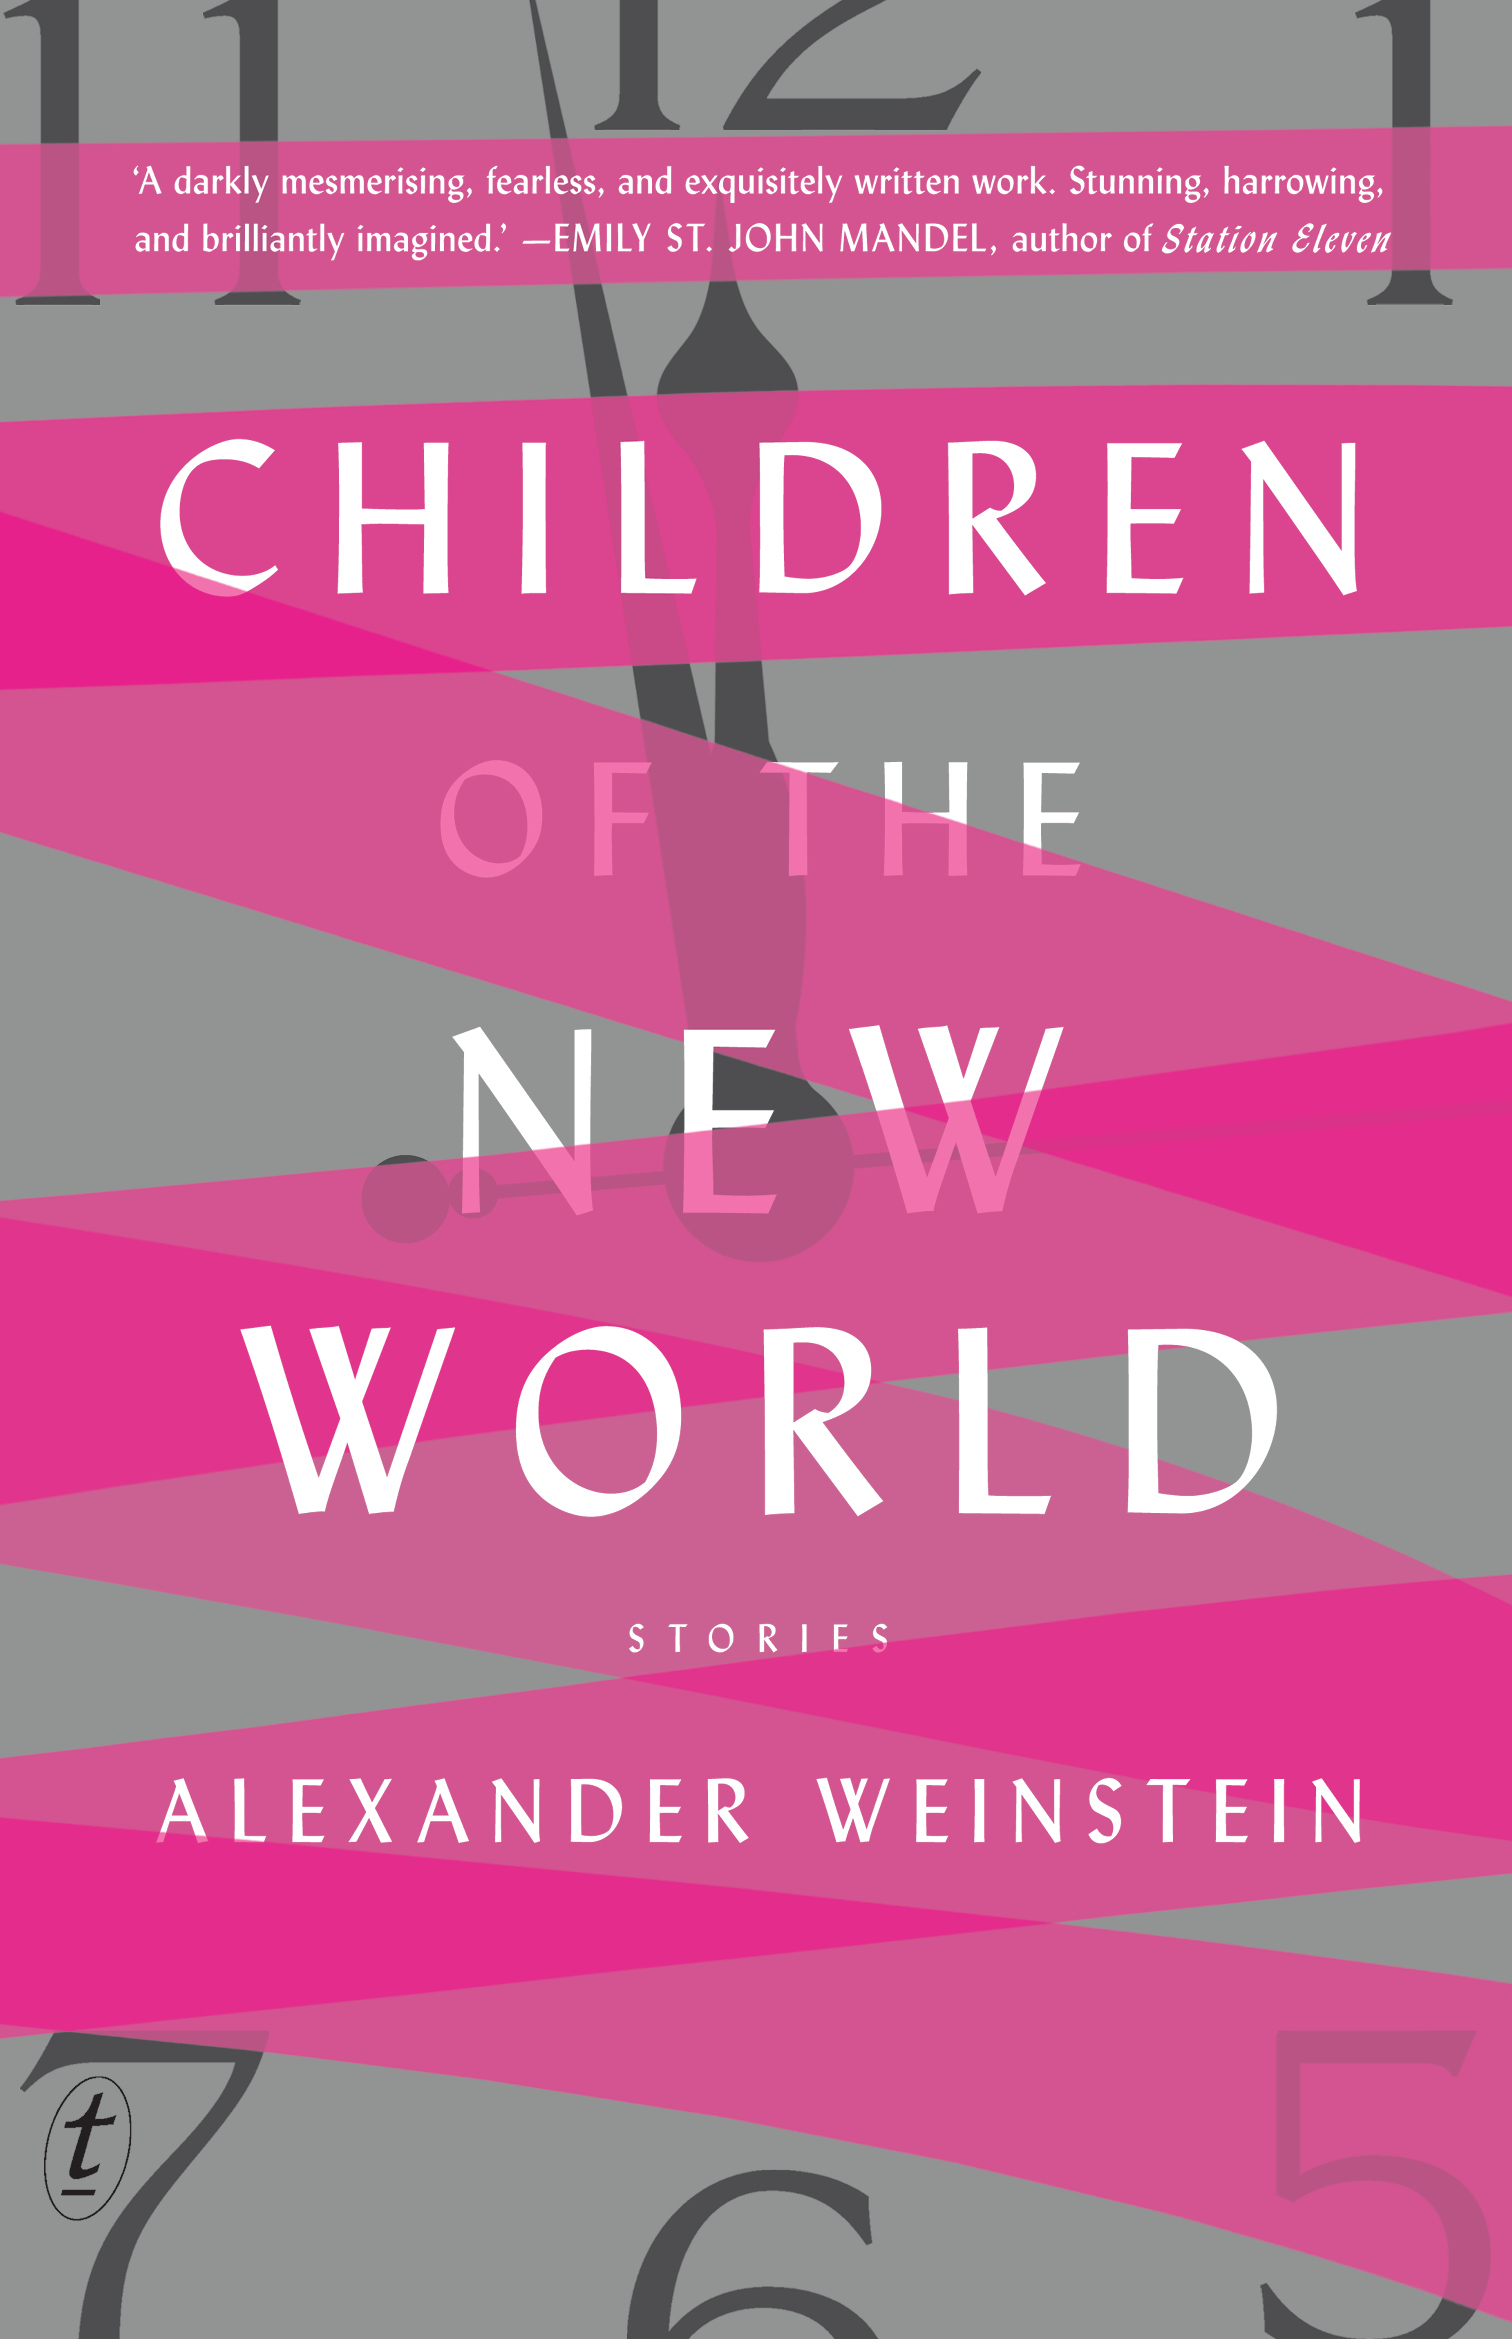 Children of the New World (2016, Text Publishing Company)